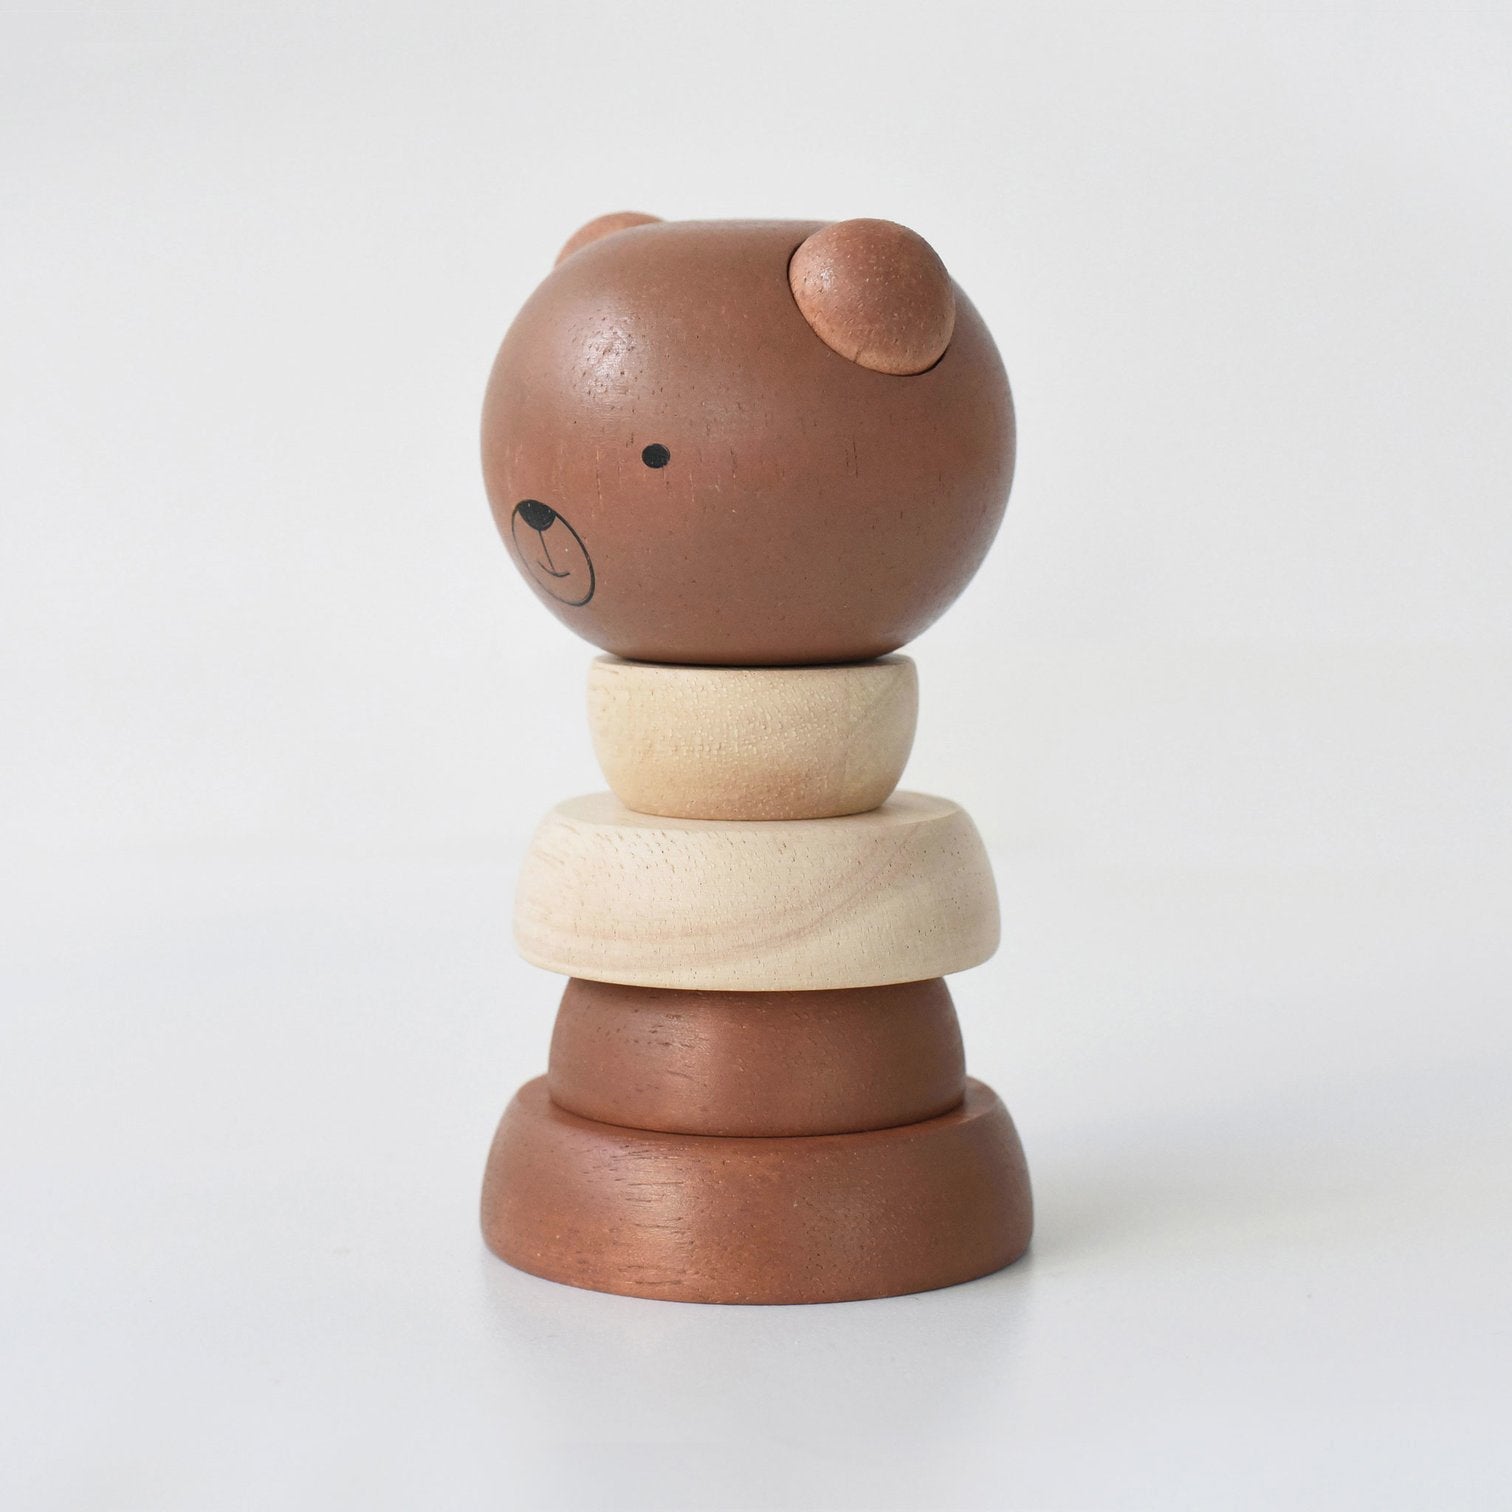 wee-gallery-wooden-toys-bear-stacking-toy-baby-toddler-2_1512x_a46a1a16-95ea-464c-98b4-95e517d7a8fb.jpg